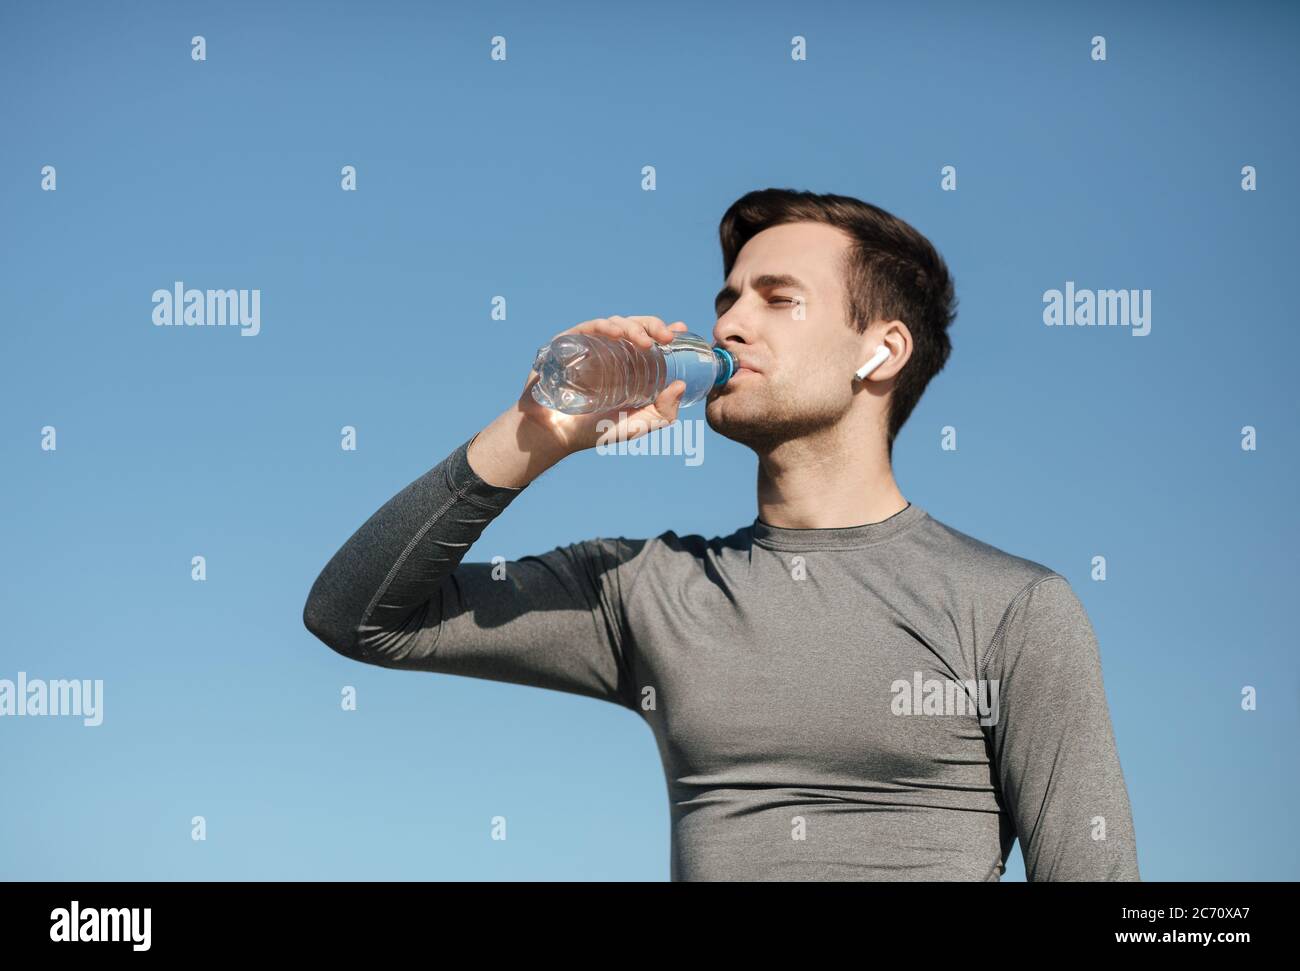 Thirst and sport. Young guy in sport uniform with modern wireless headphones, drinks water Stock Photo